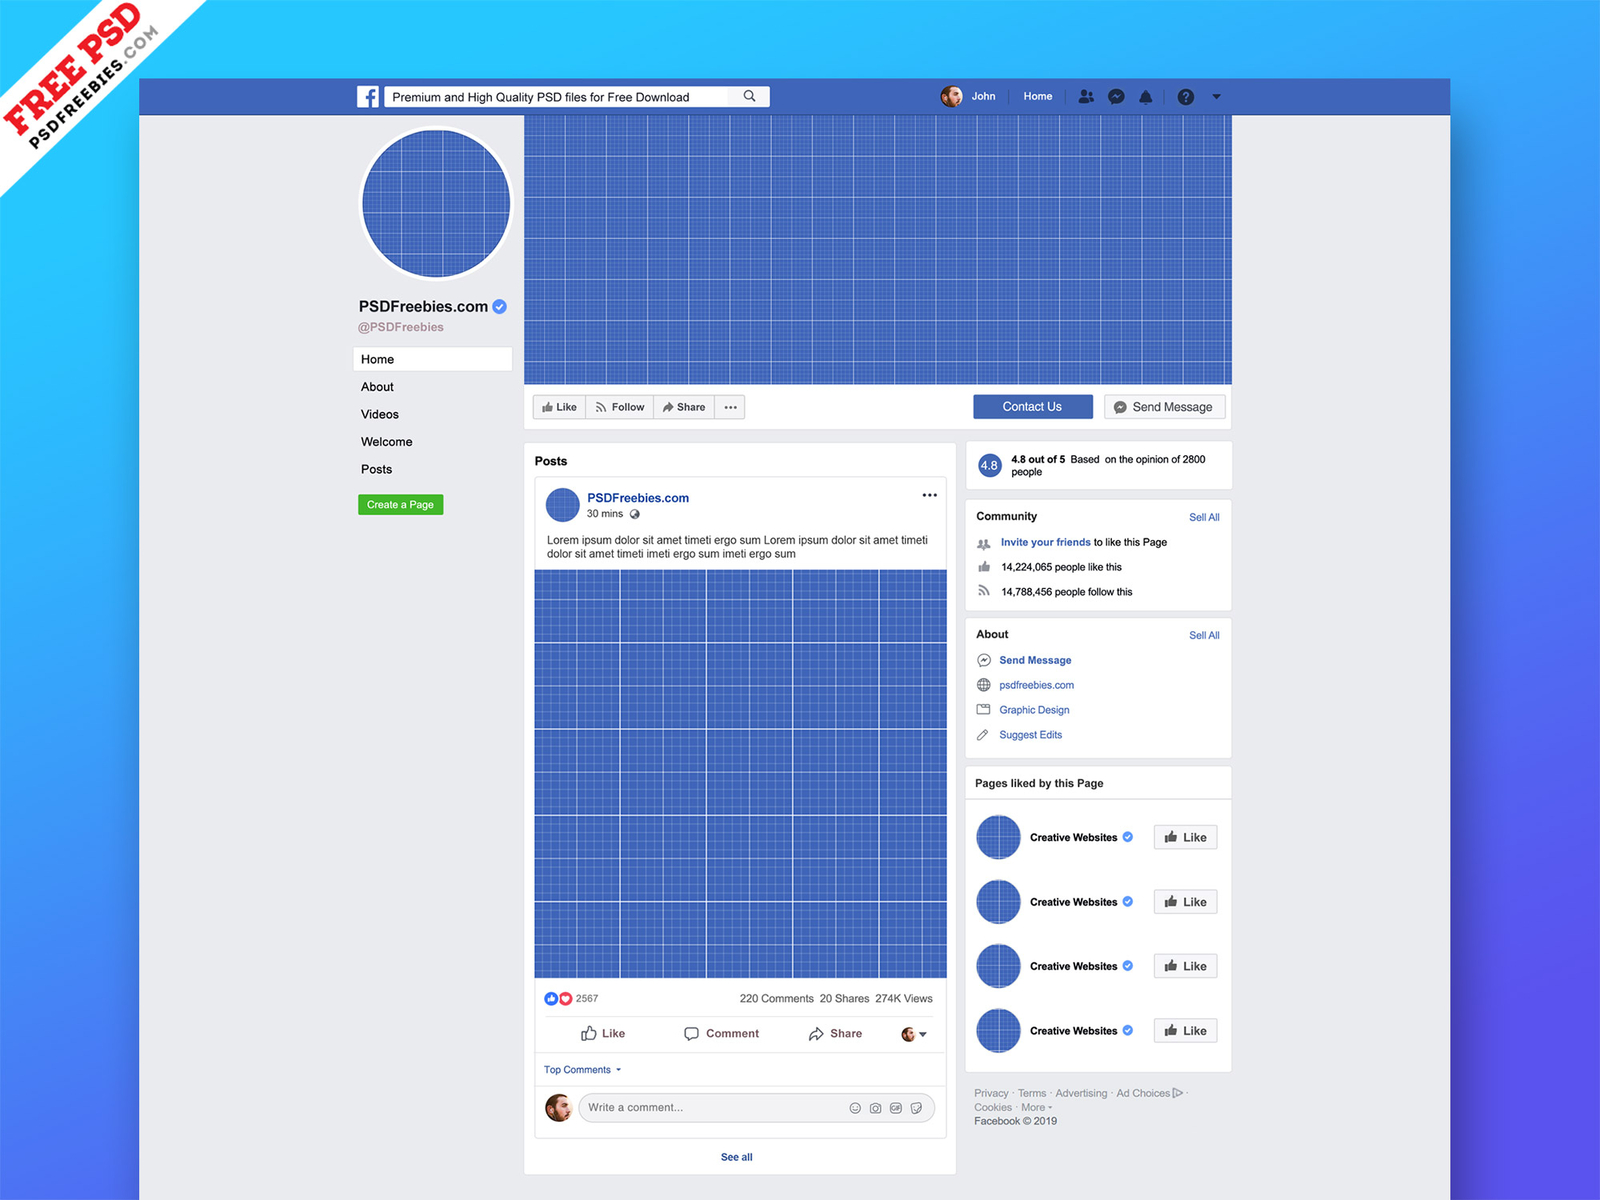 Download New Facebook Page Mockup 2019 PSD by PSD Freebies on Dribbble